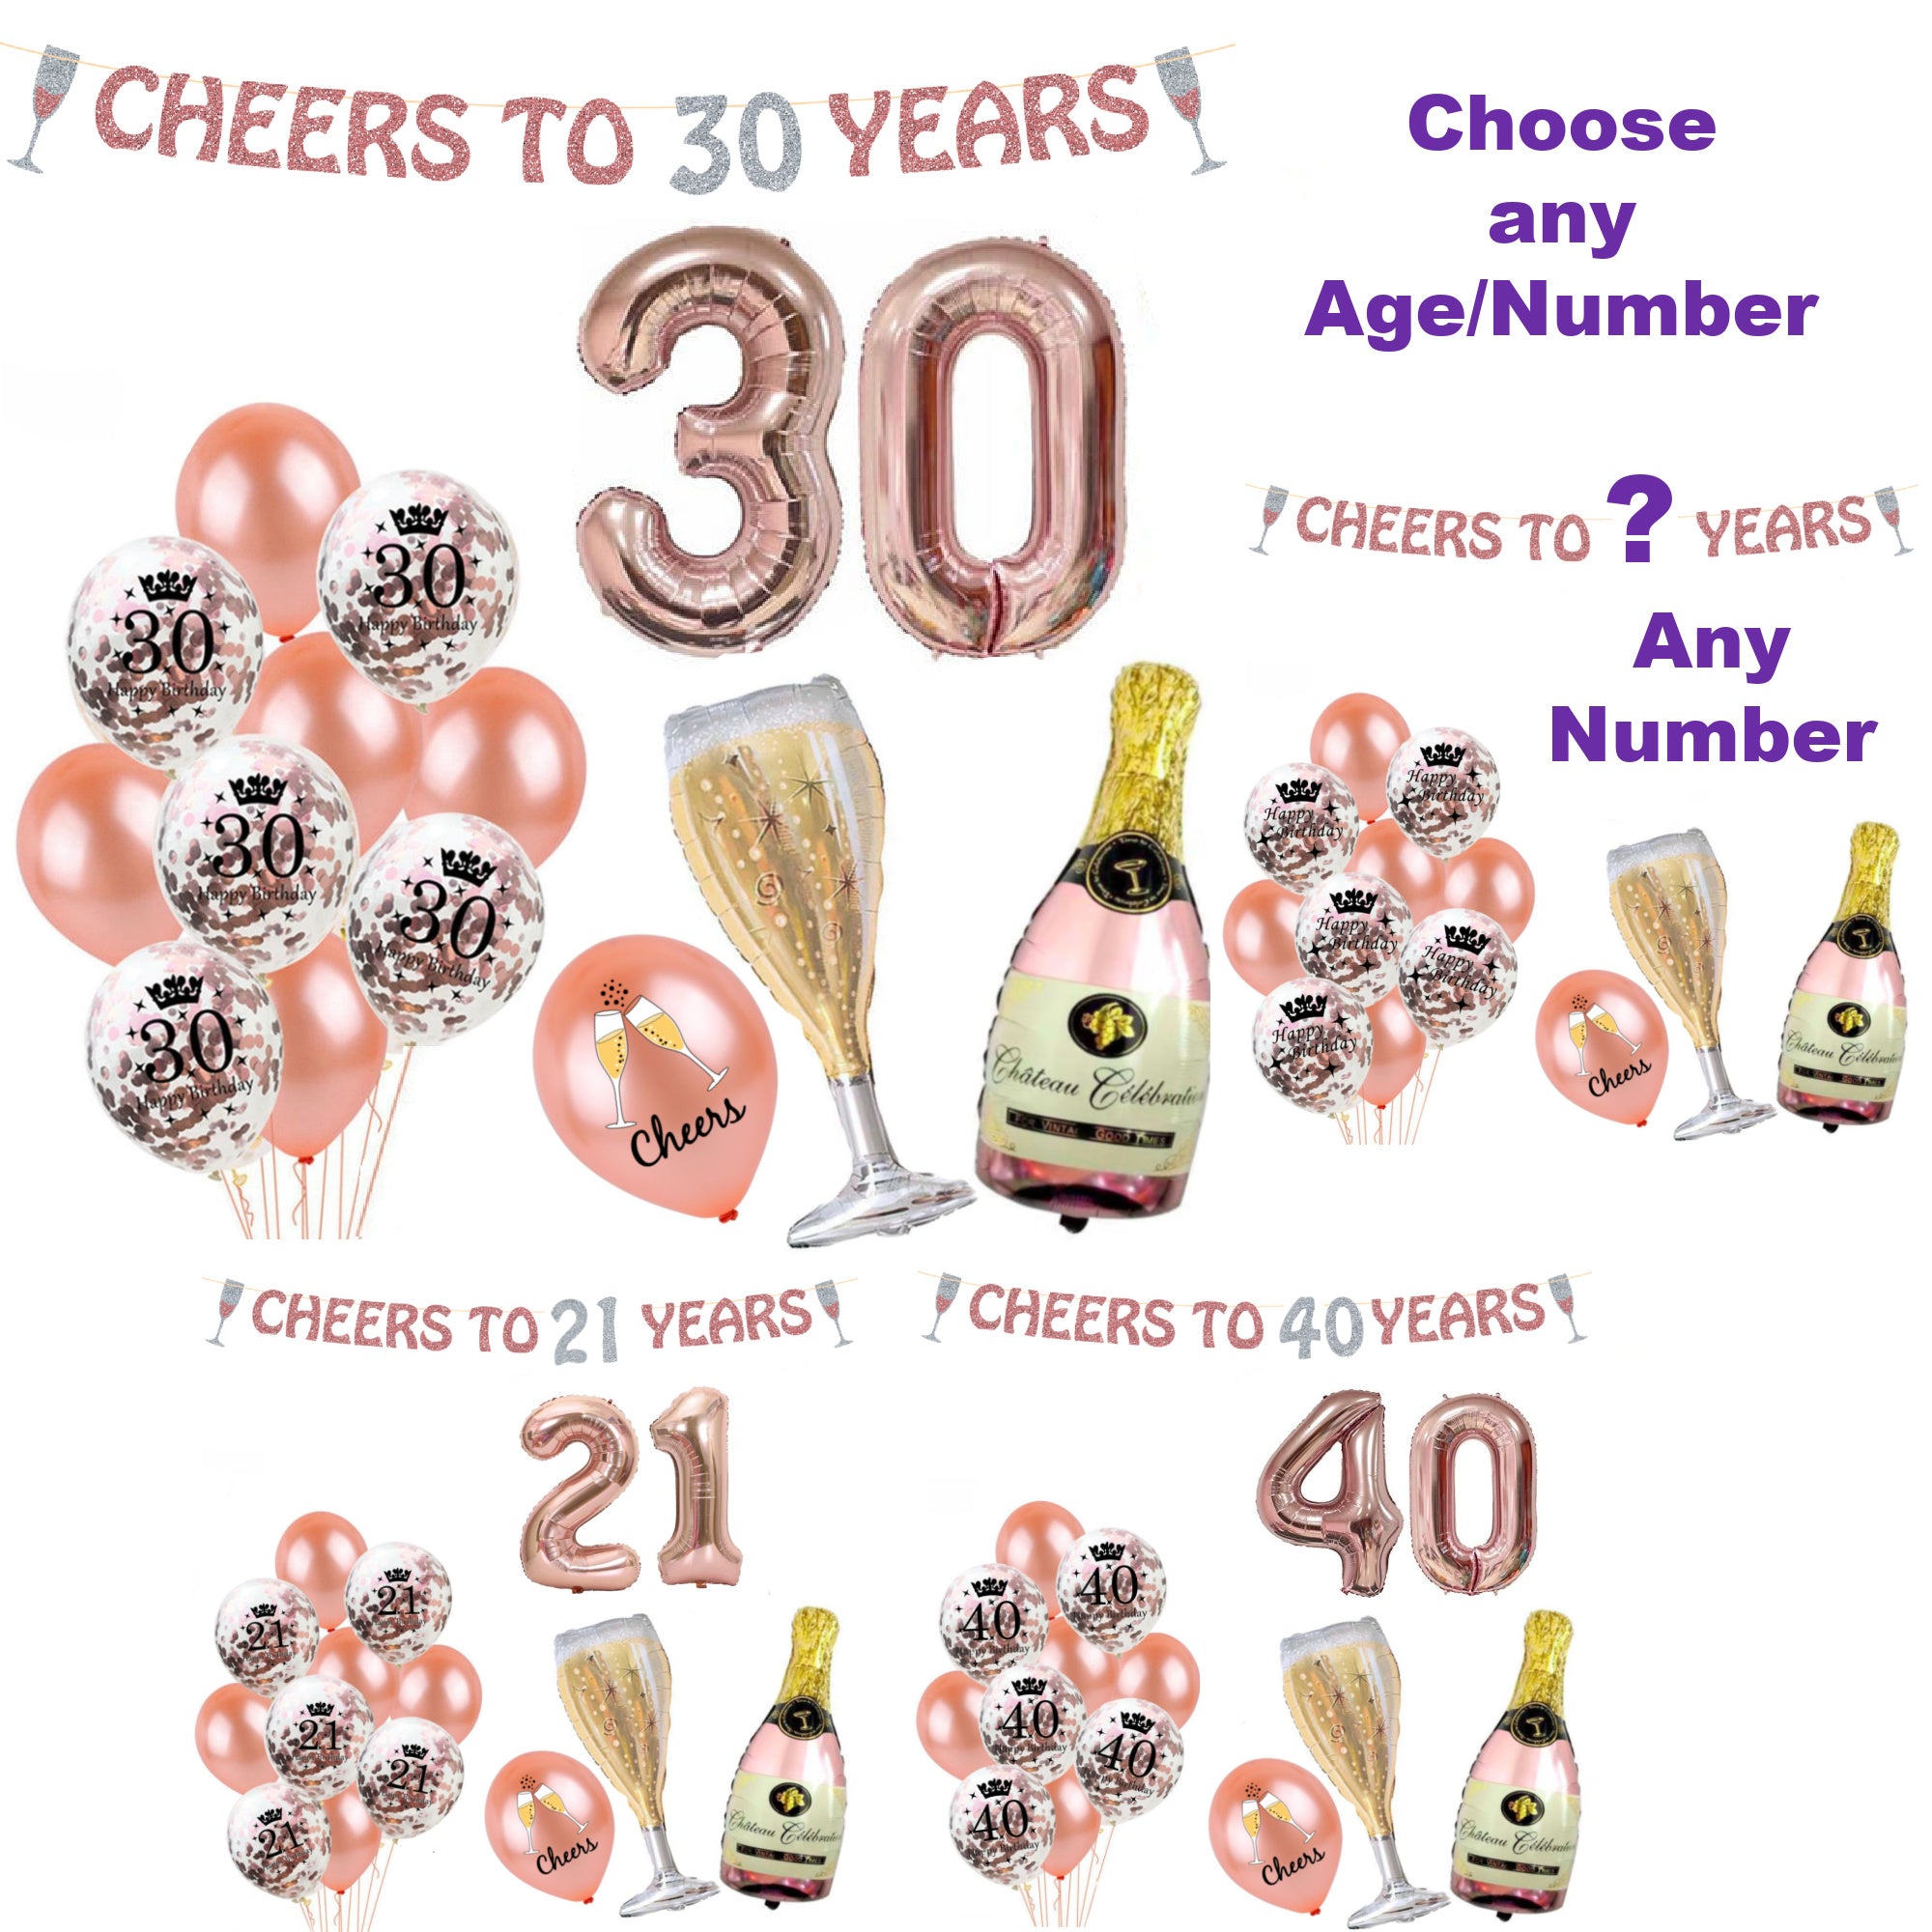 Rose Gold Birthday Decorations, Cheers to 30 Years Banner, All Ages & Anniversary